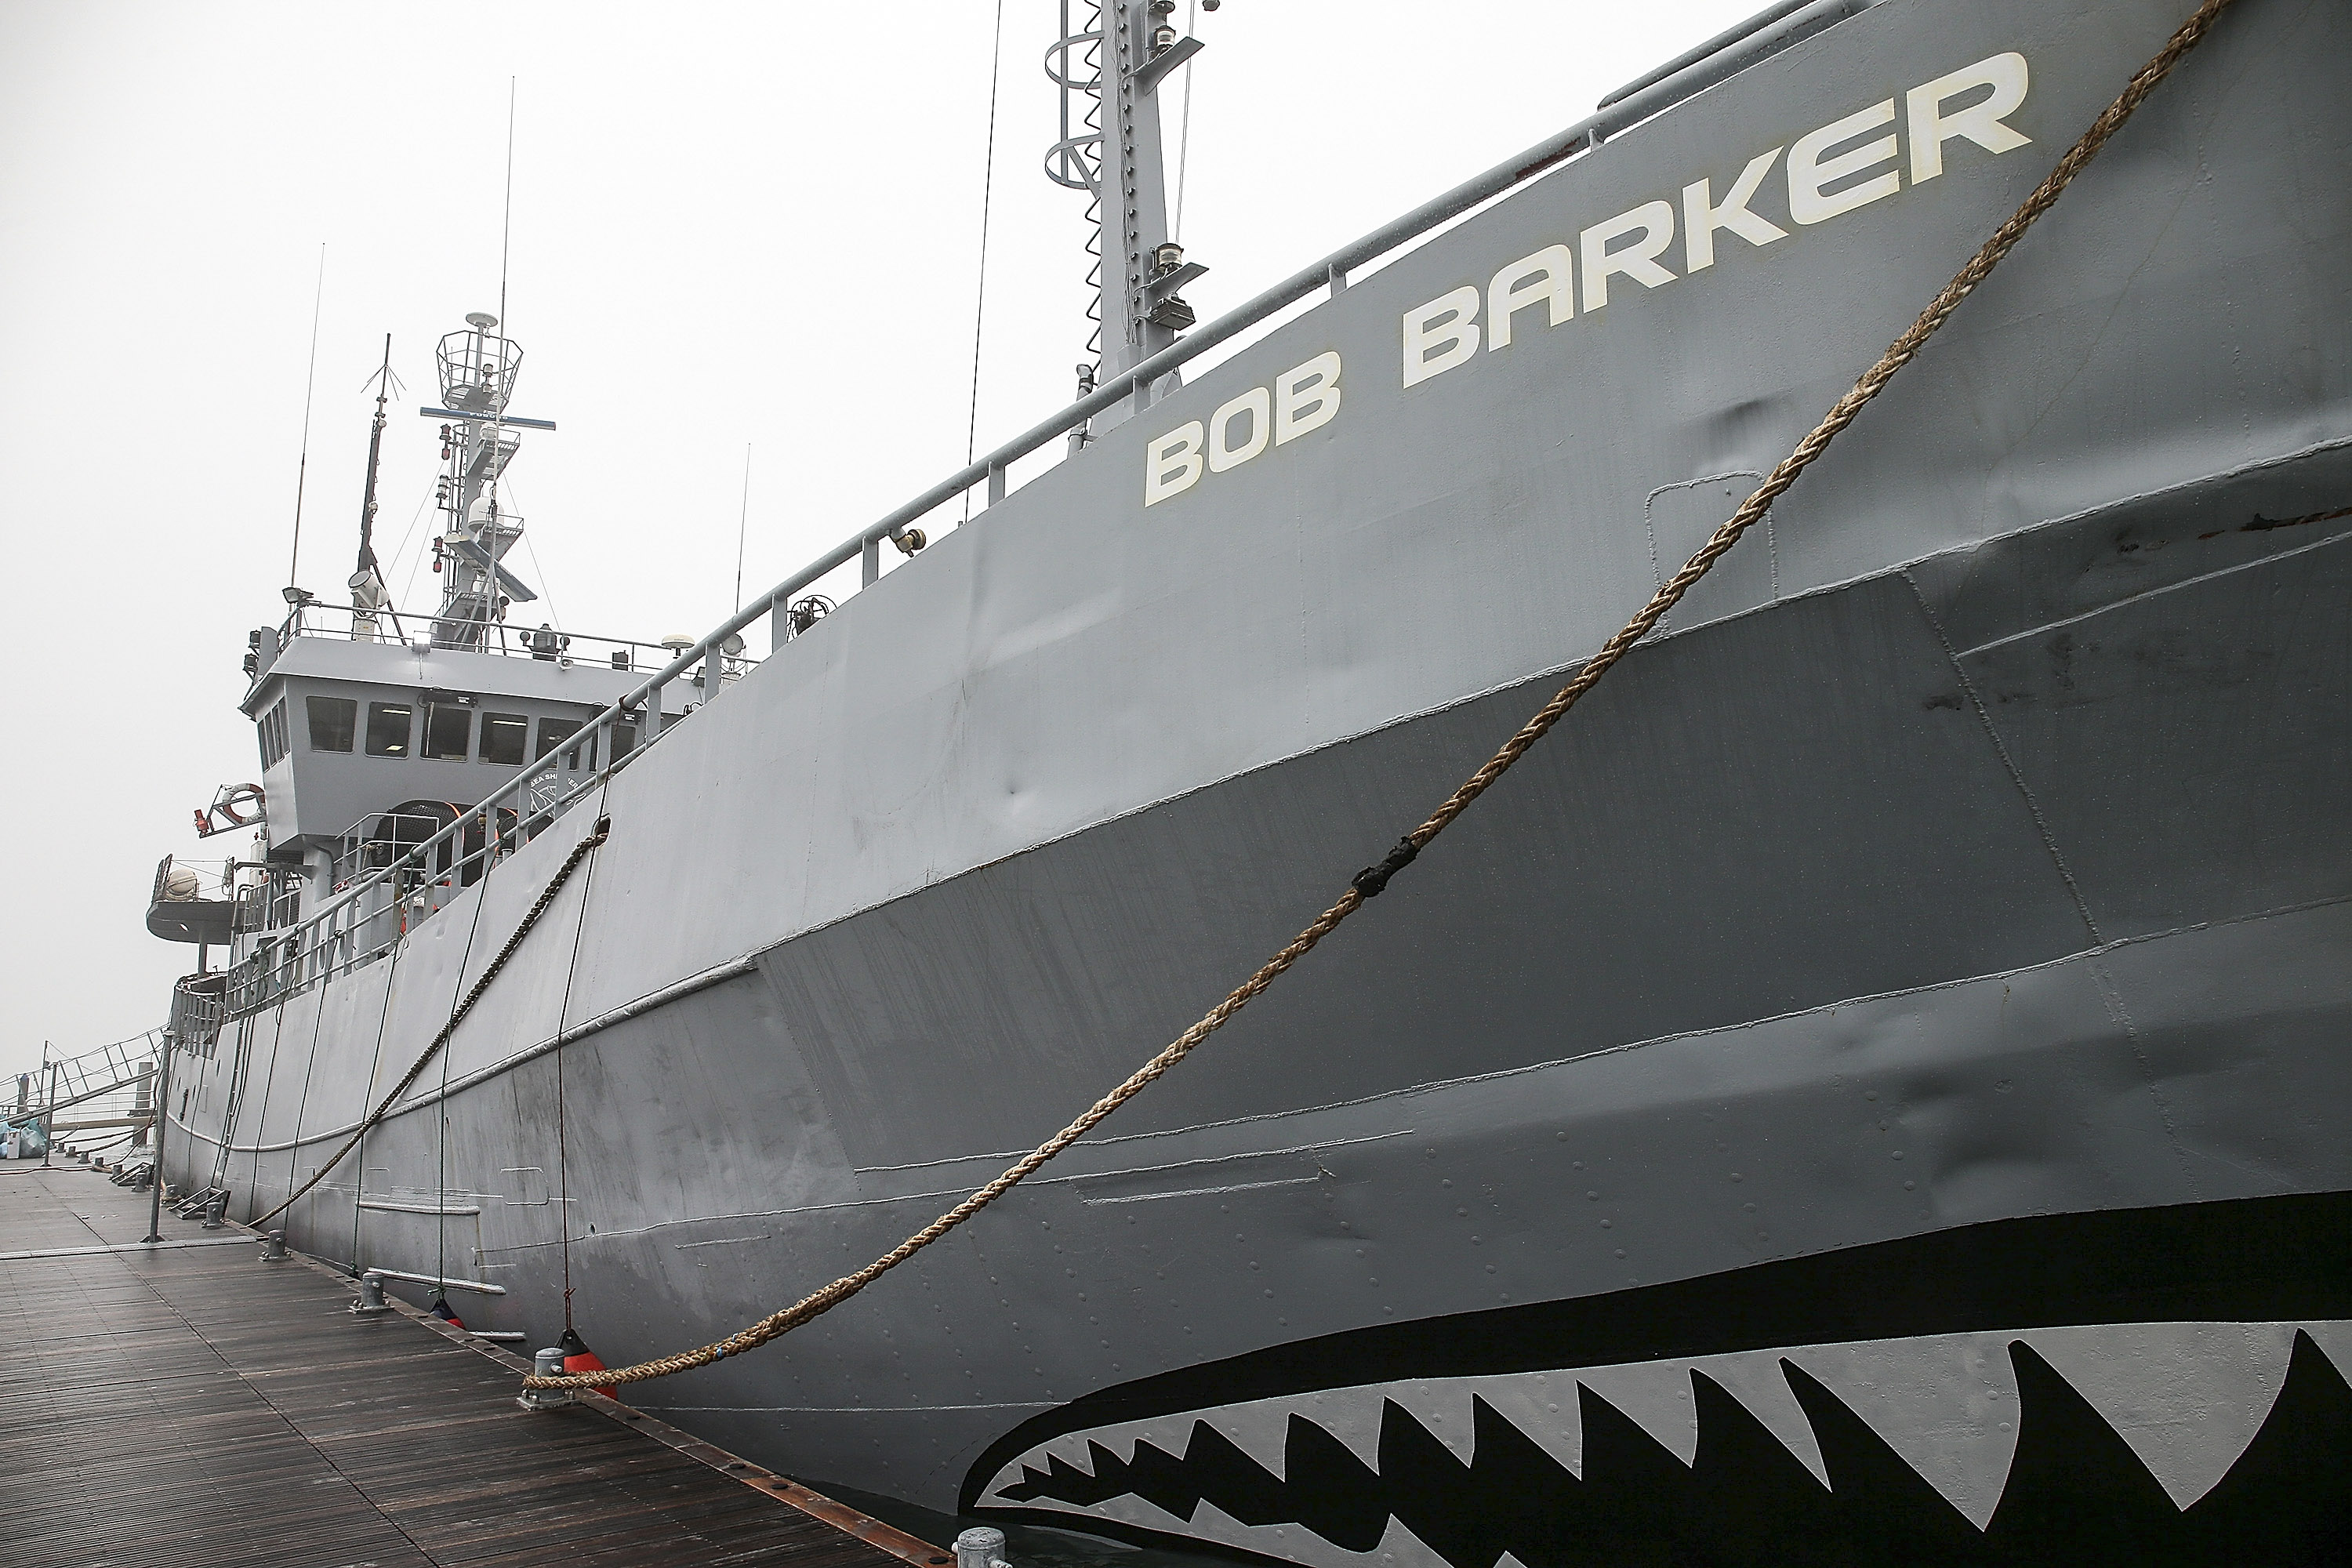 The Sea Shepherd M/V Bob Barker docks in Certosa on February 4, 2016 in Venice, Italy. The M/V Bob Barker of the Sea Shepherd fleet is a research vessel named after American game show host Bob Barker, who donated $5 million to the society. | Source: Getty Images